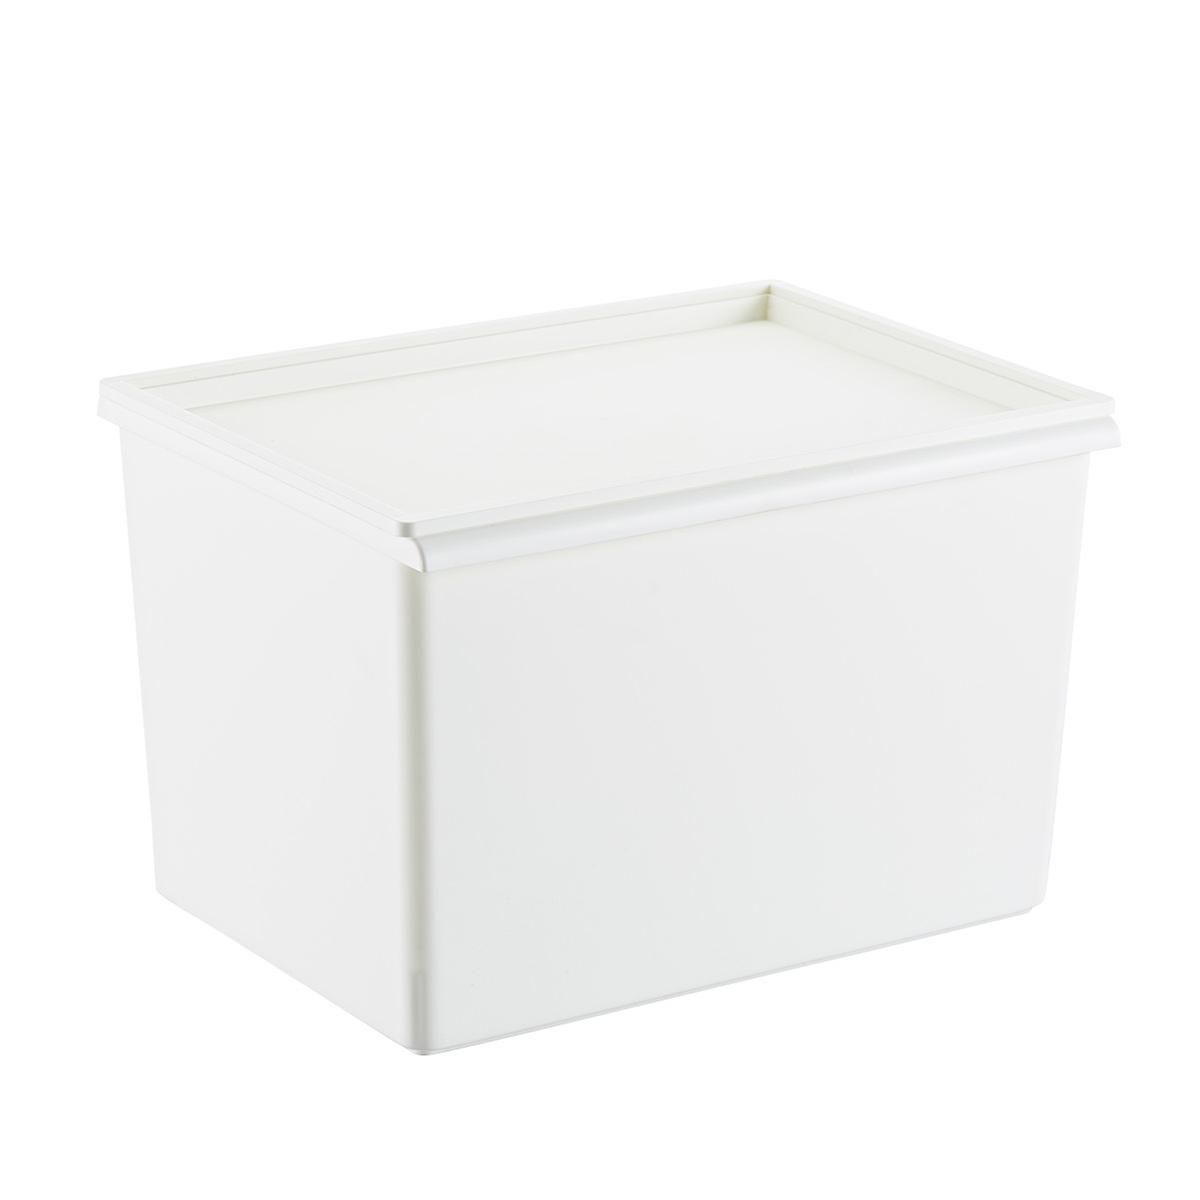 White Plastic Stacking Bins with Lids | The Container Store